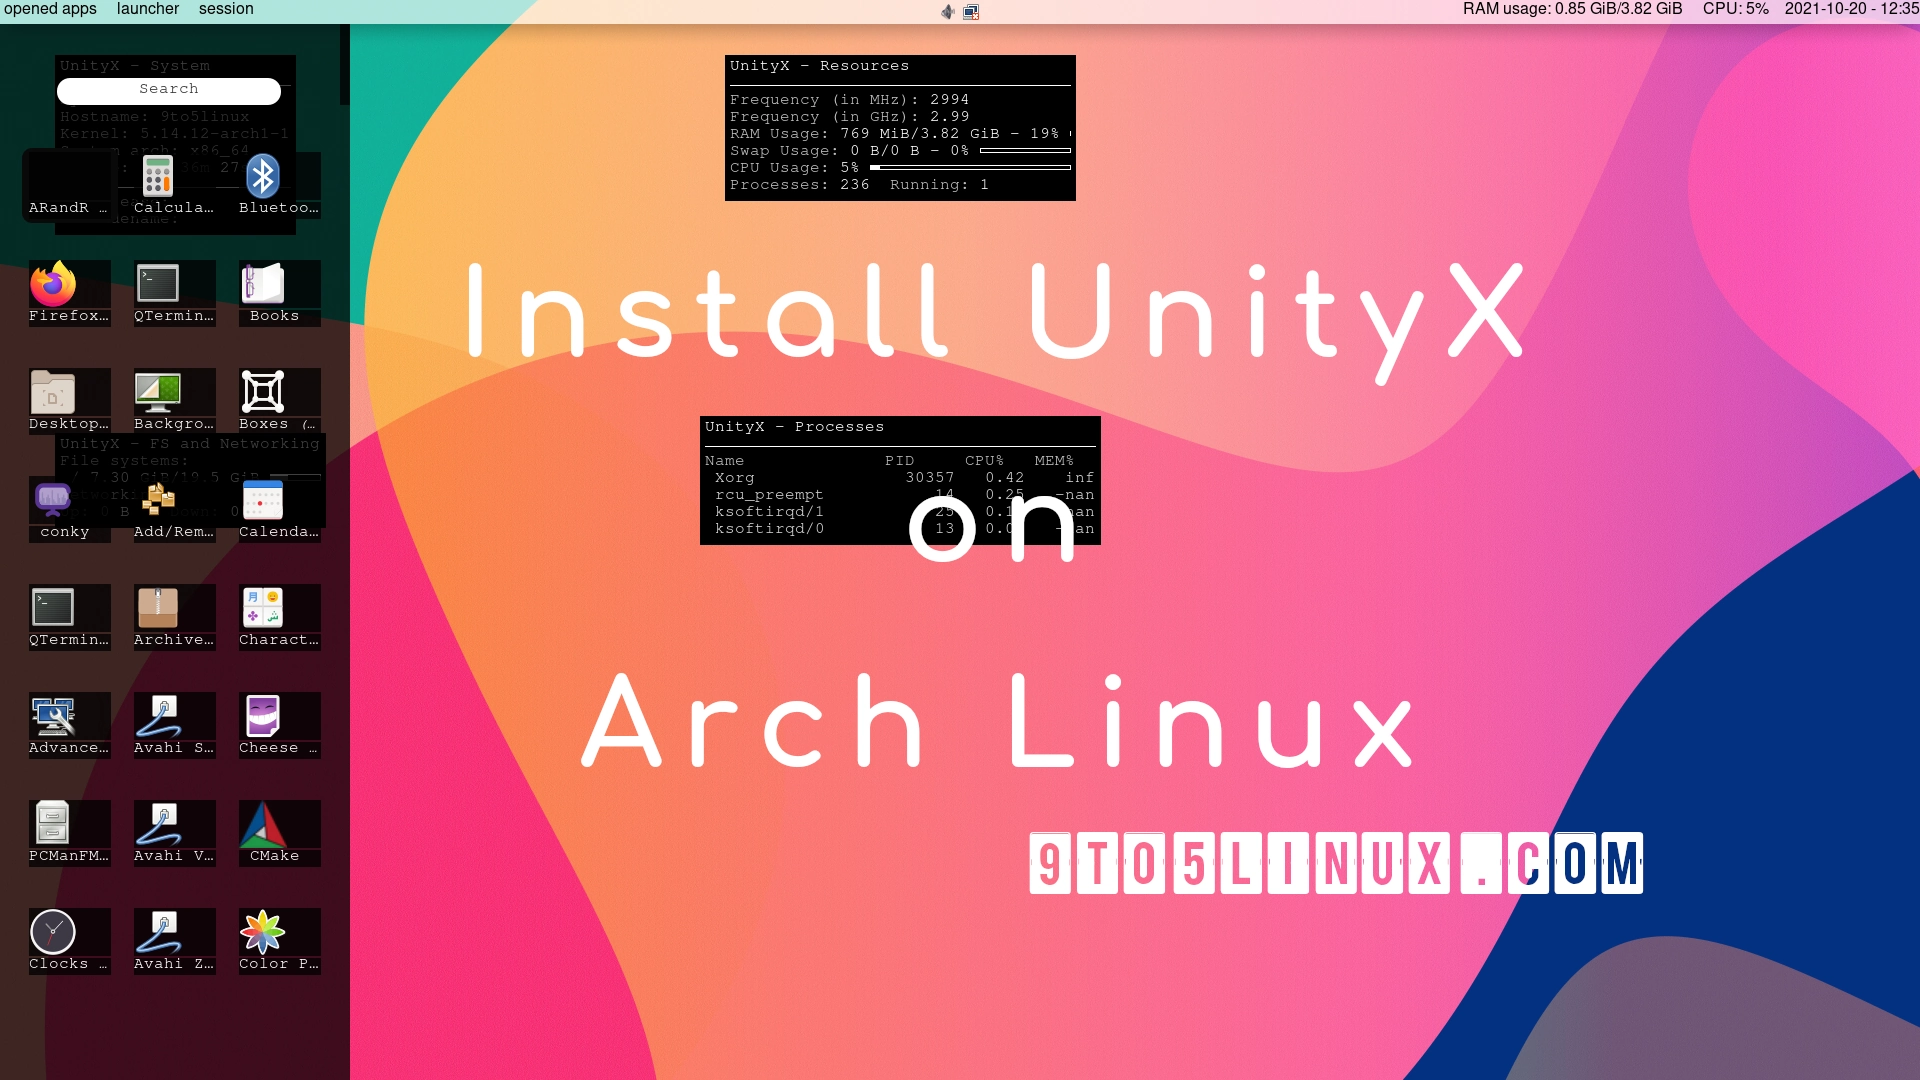 You Can Now Install the UnityX Desktop in Arch Linux, Here’s How